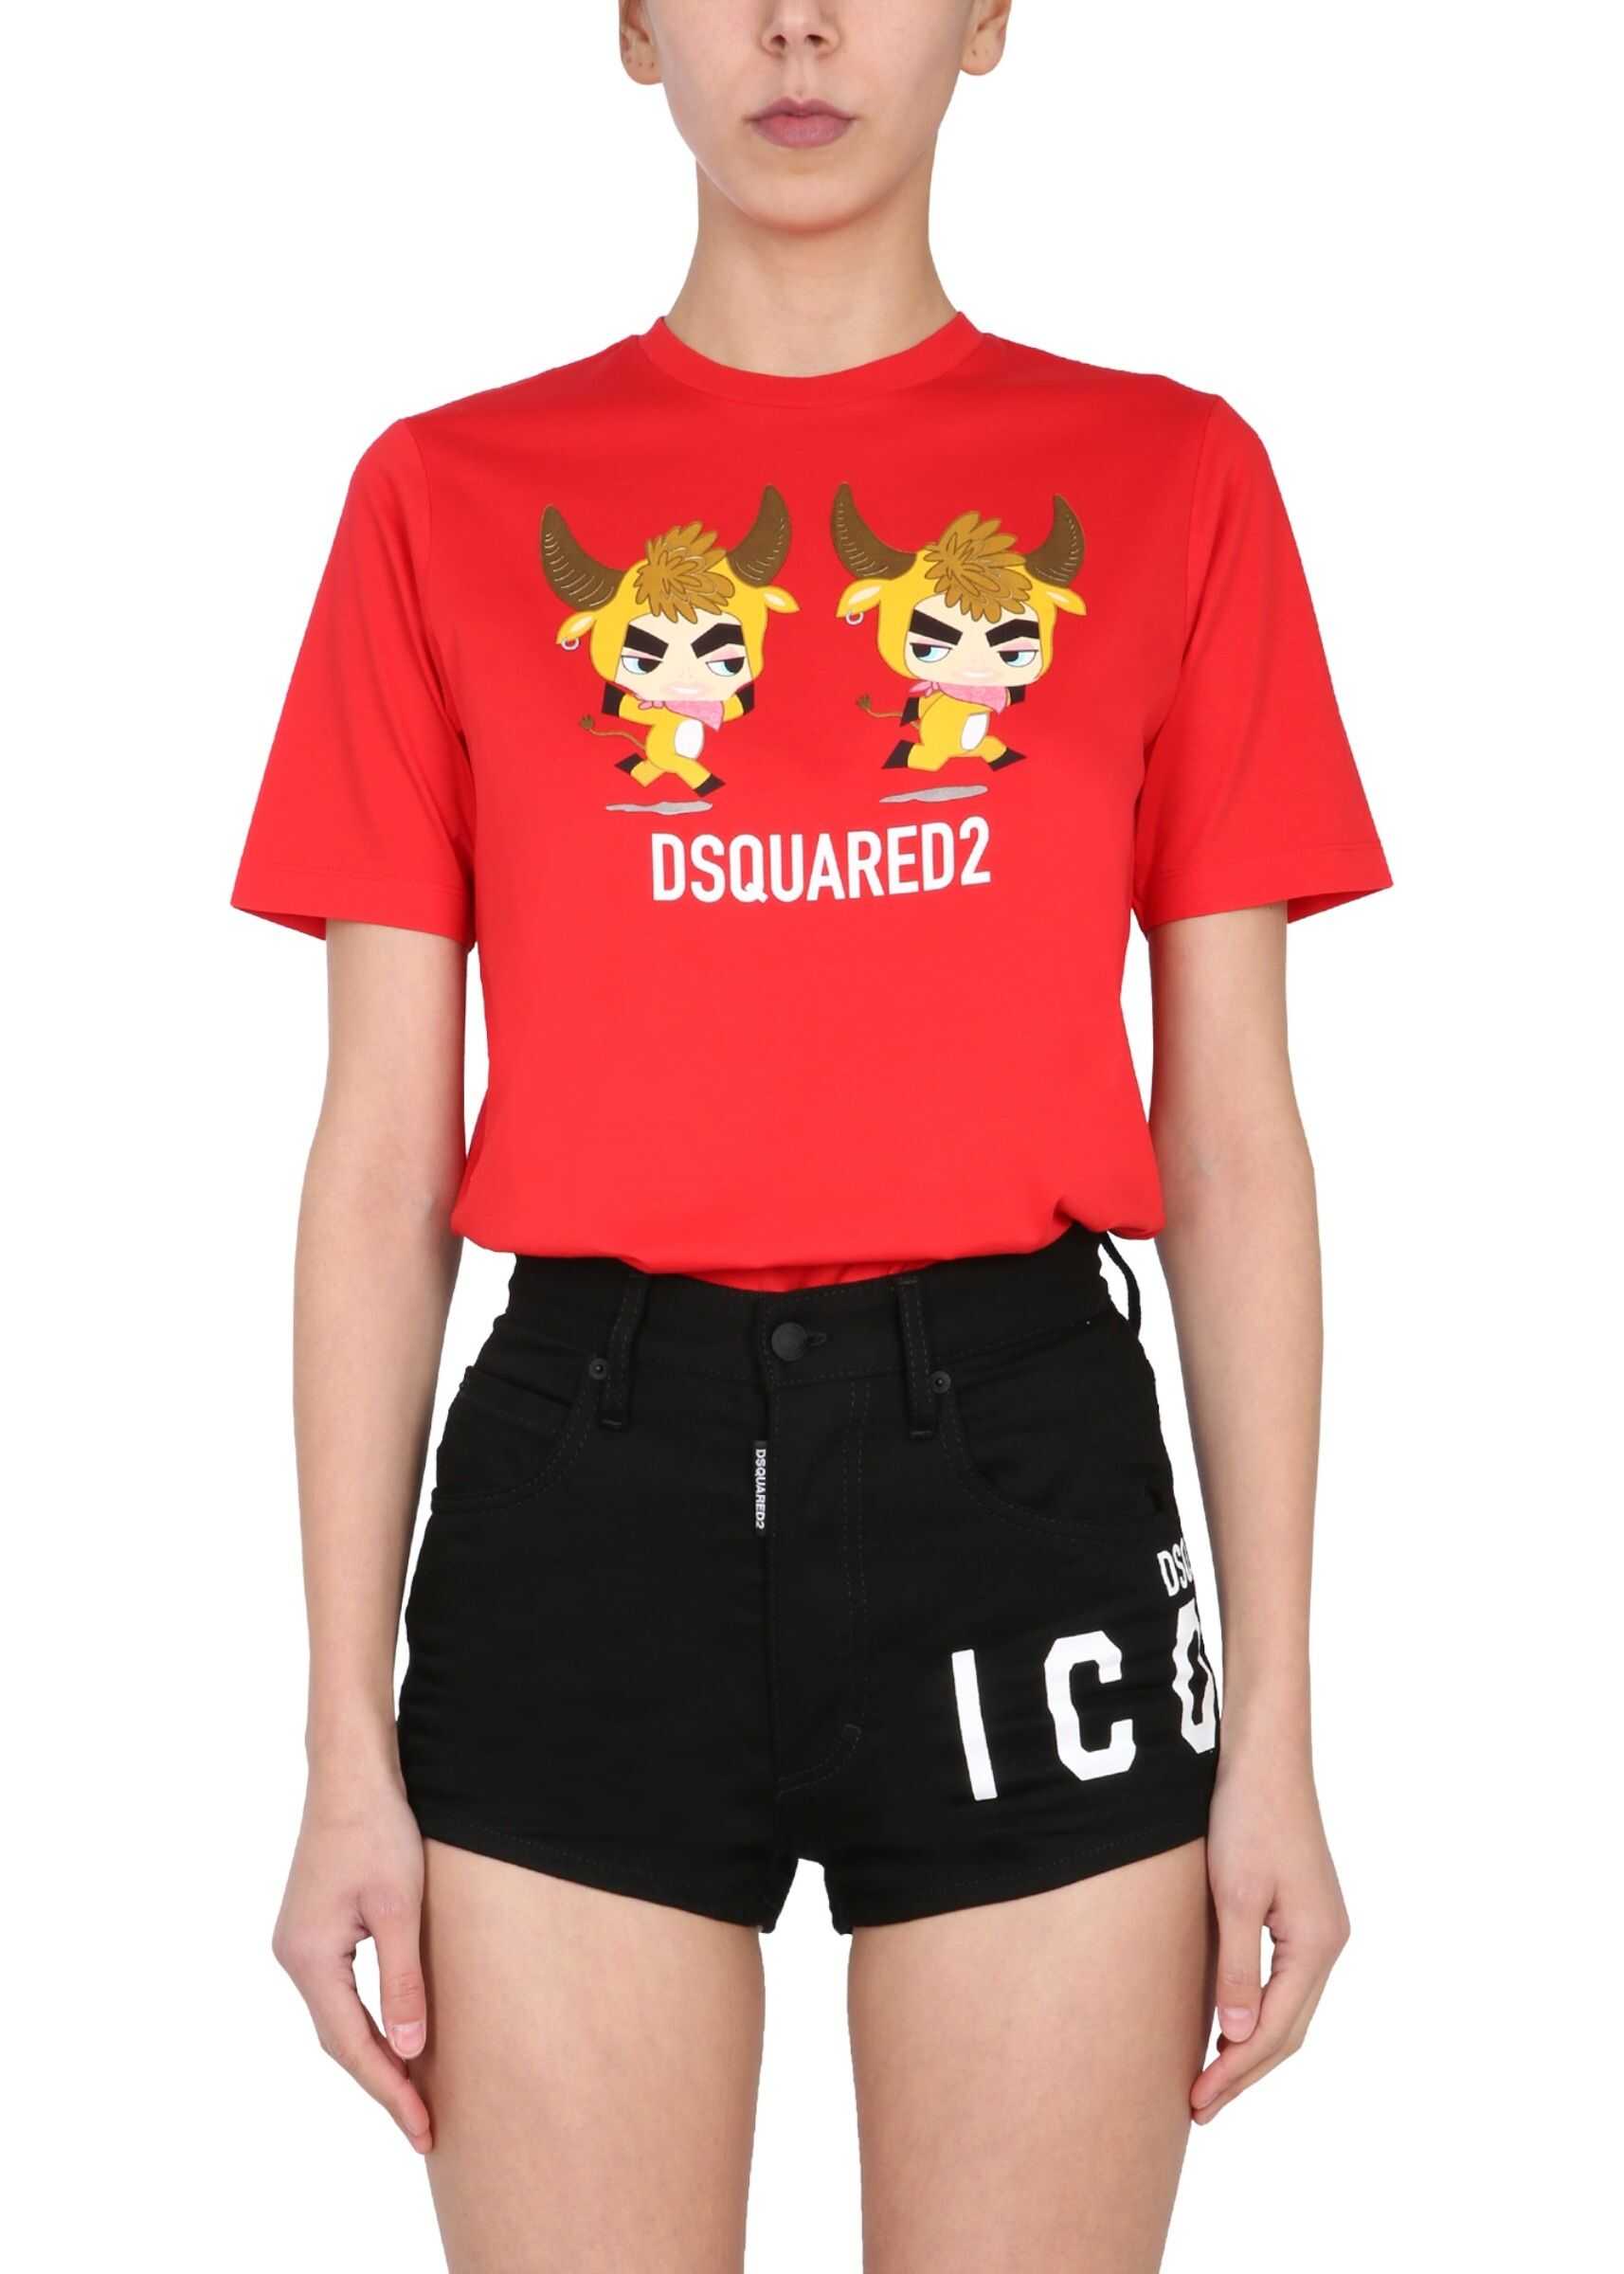 DSQUARED2 Crew Neck T-Shirt RED